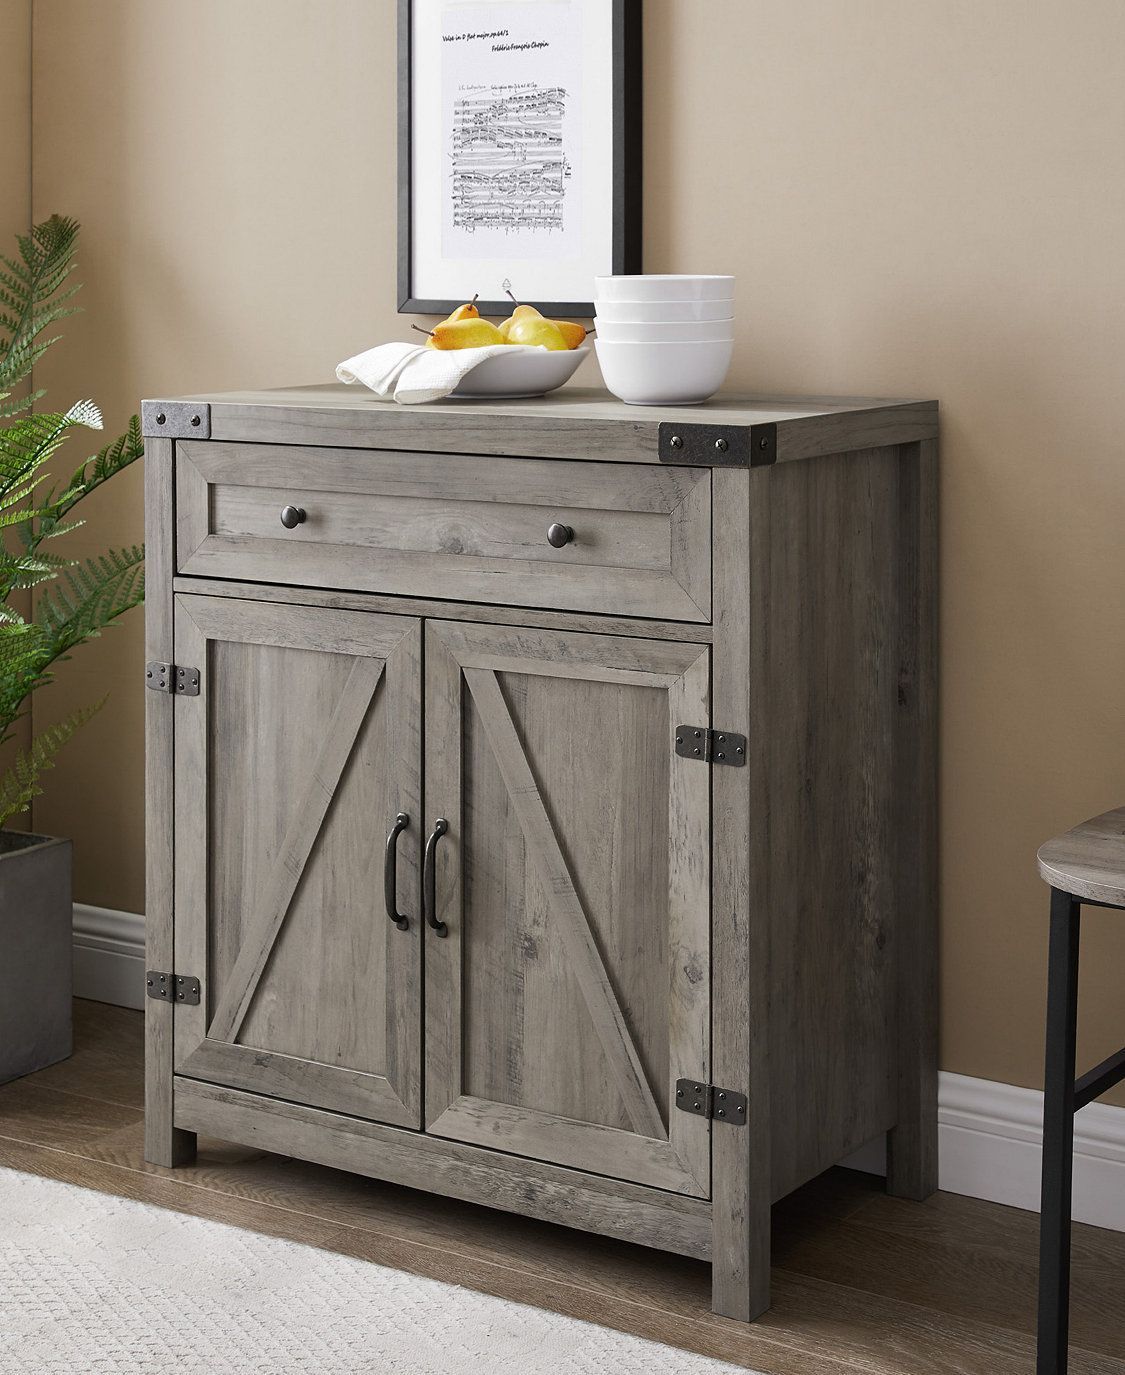 Manor Park Farmhouse Barn Door Accent Cabinet Reclaimed Pertaining To Woven Paths Open Storage Tv Stands With Multiple Finishes (View 15 of 15)